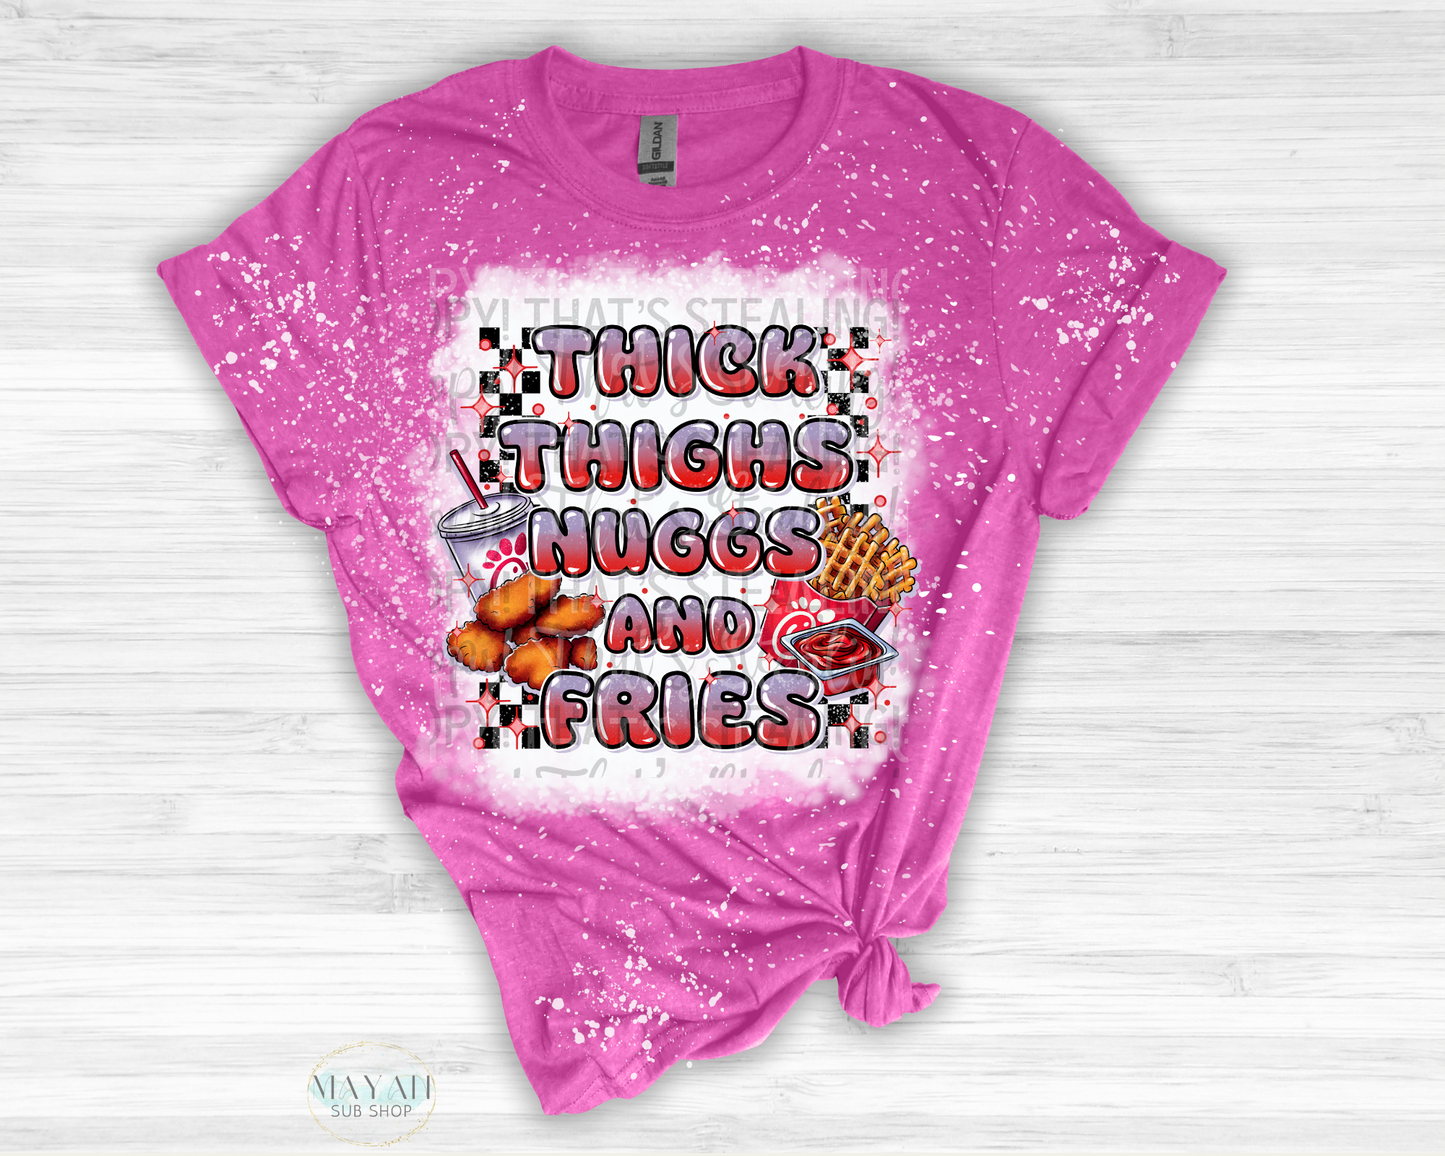 Thick Thighs Nuggs and Fries Bleached Shirt - Mayan Sub Shop